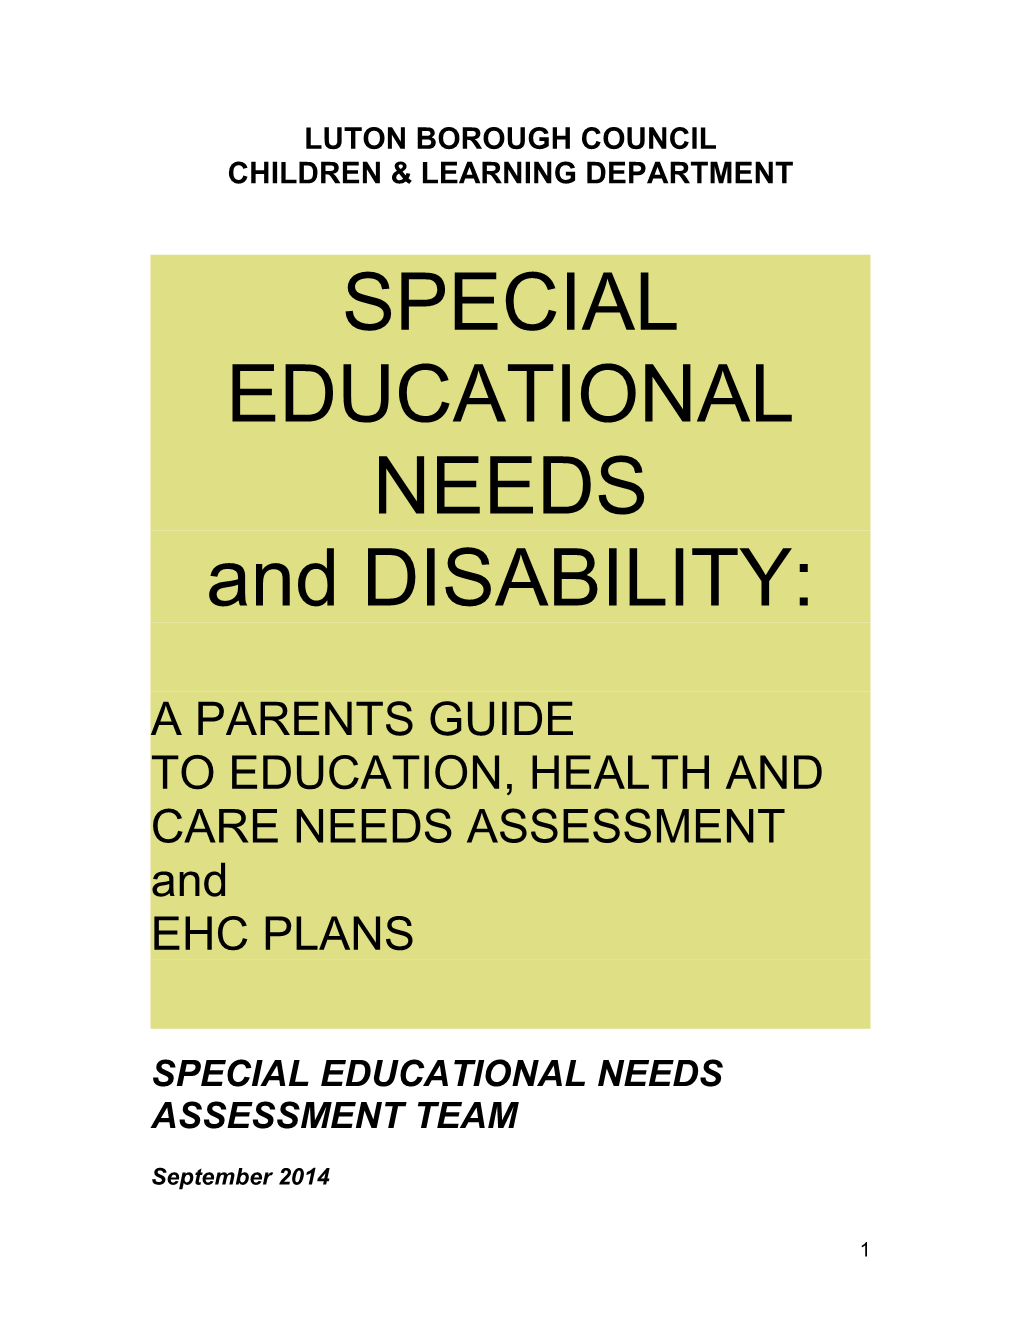 SEND Parents Guide to EHC Needs Assessment and EHC Plans (Sept 2014)